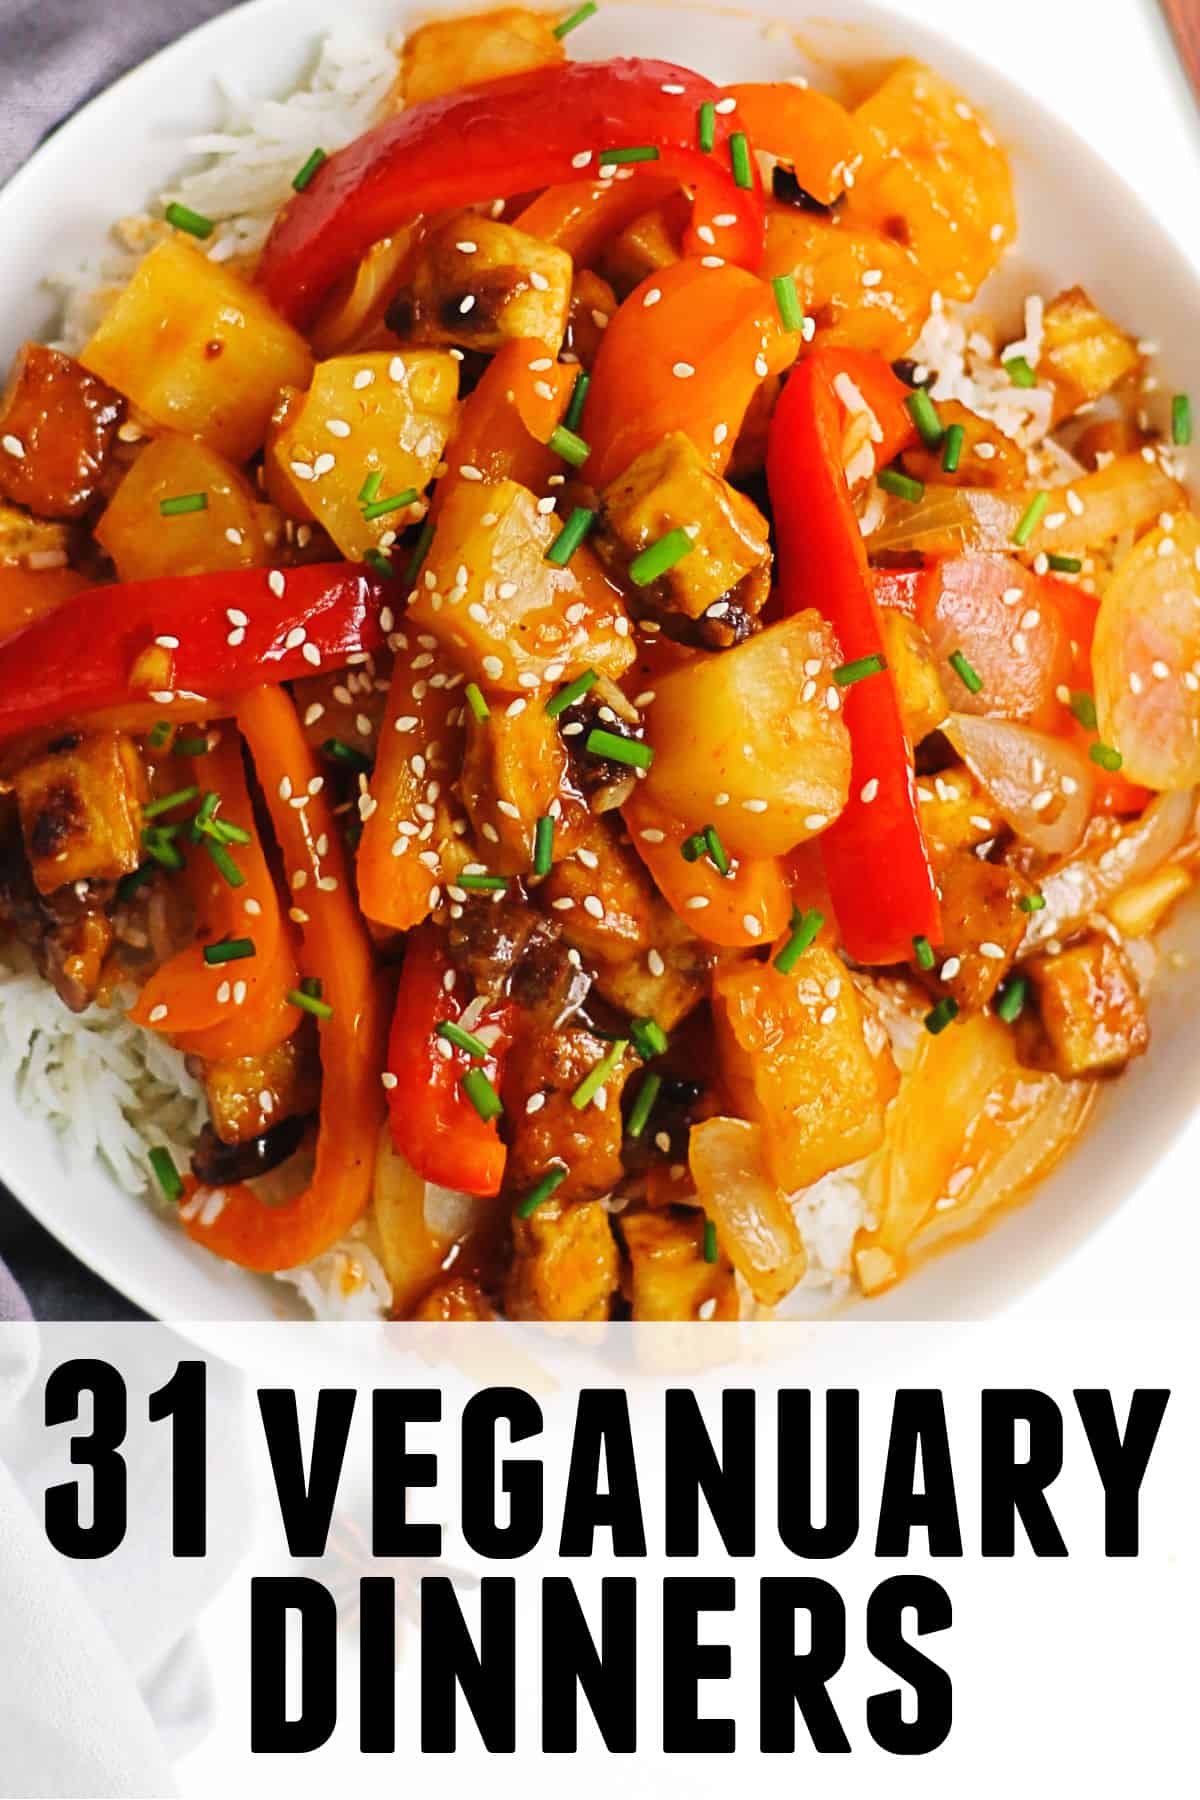 A photo of sweet and sour tofu with text on the bottom that says, "31 veganuary dinners."